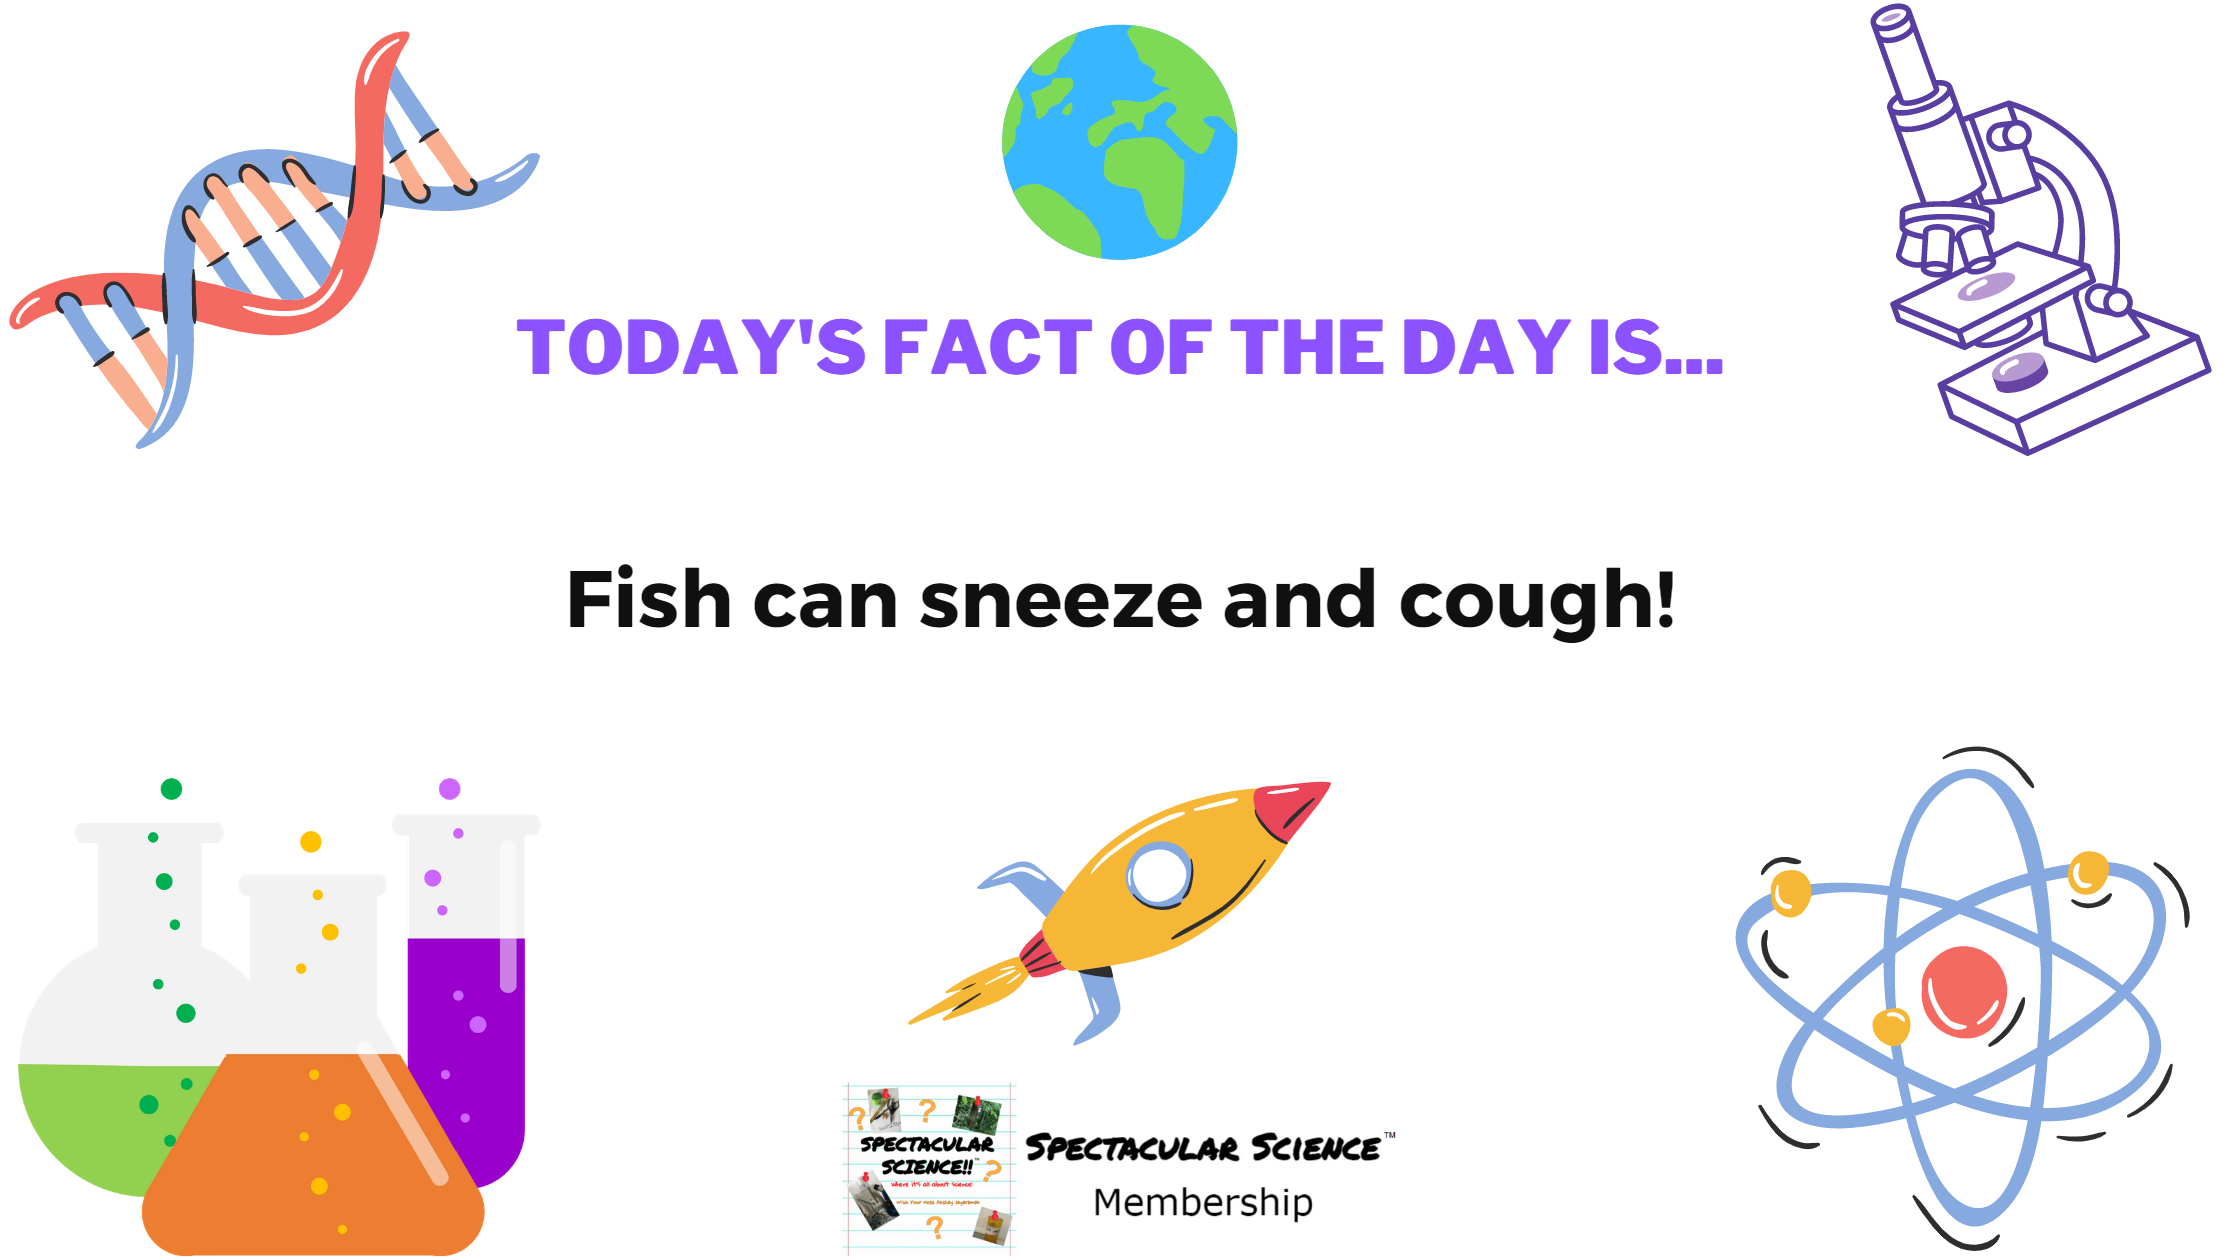 Fact of the Day Image February 8th